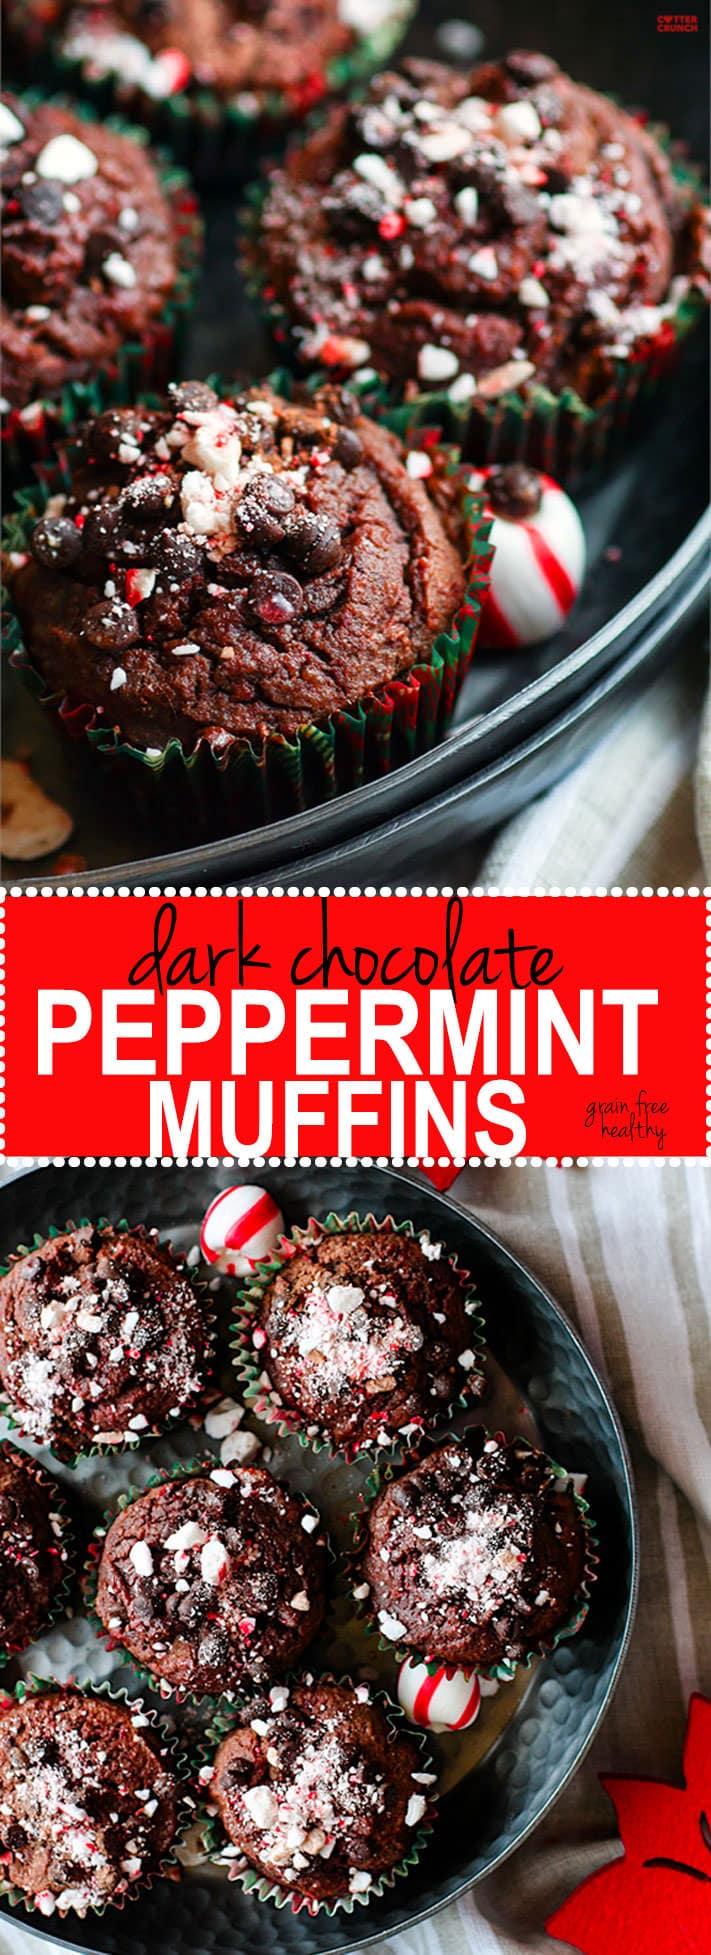 Dark Chocolate Peppermint Muffins with Soothing Peppermint oil! These chocolate peppermint muffins are not only grain free, but a healthy and festive way to enjoy breakfast or dessert. Plus they are a perfect pair for your coffee or hot chocolate, rich dark chocolatey flavor and hints of peppermint. A must make during winter or holiday baking time! Dairy free option as well. @cottercrunch